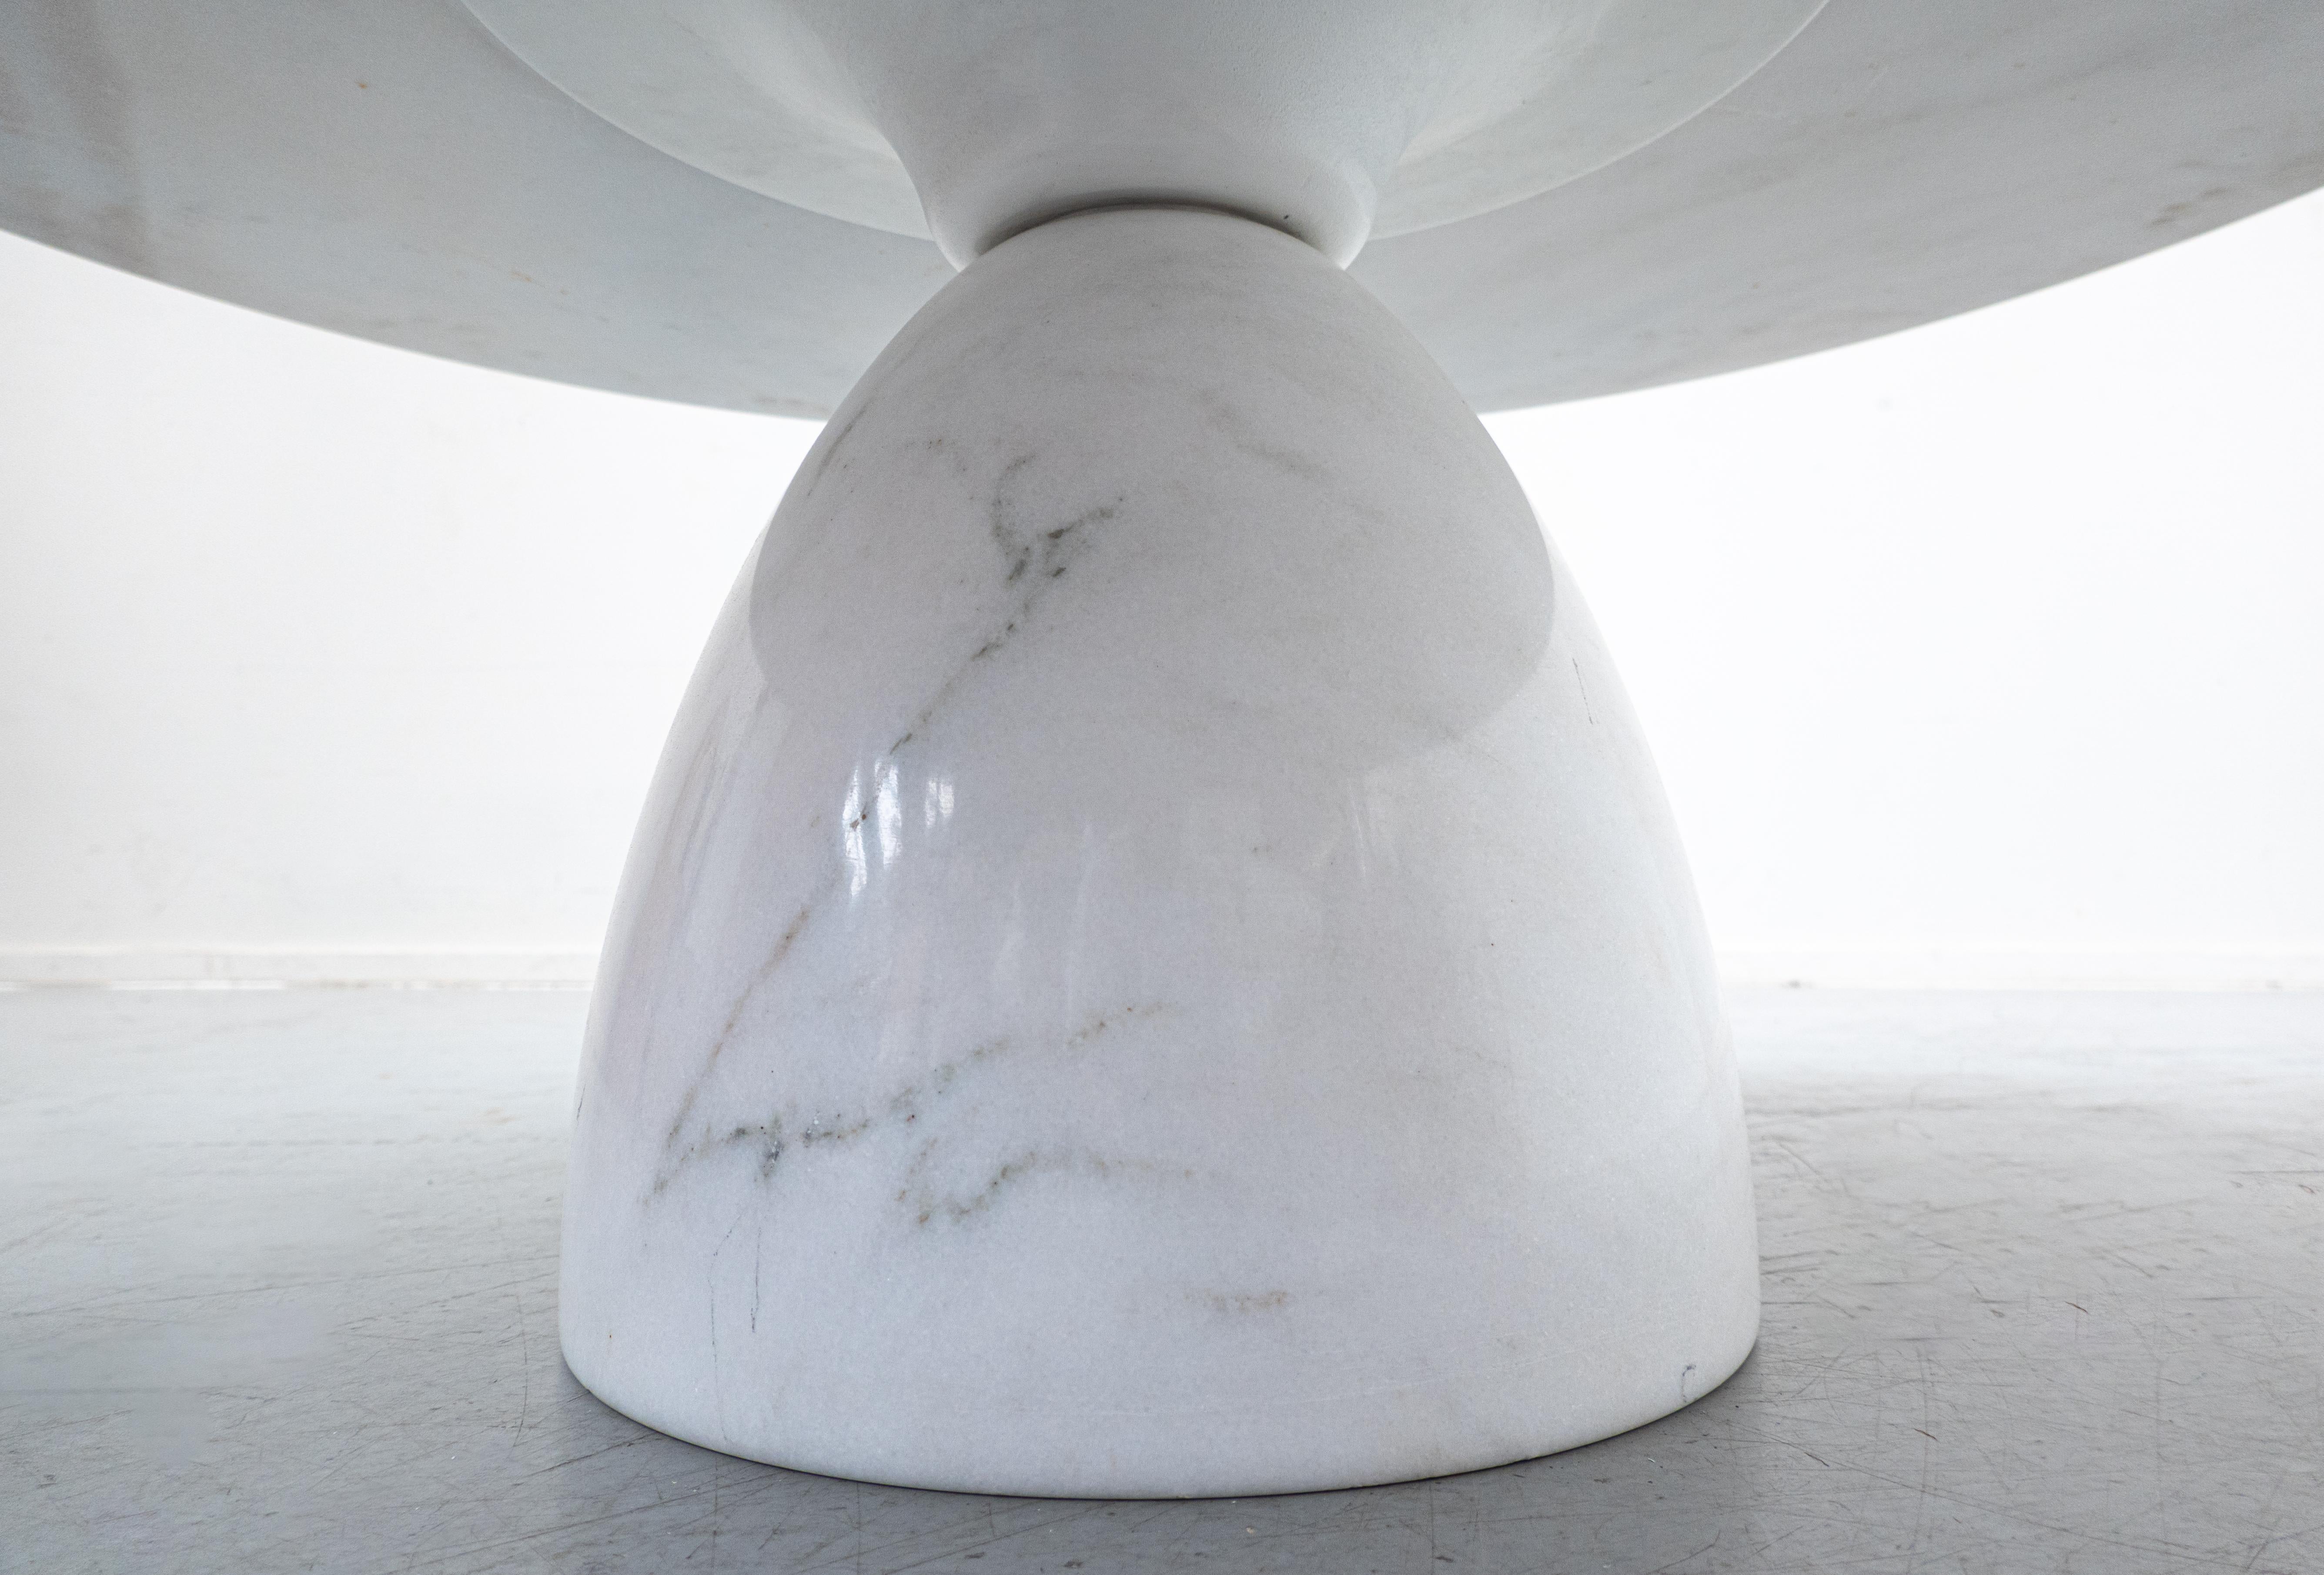 Round white carrara marble coffee table by Peter Draenert, 1970s
Germany.